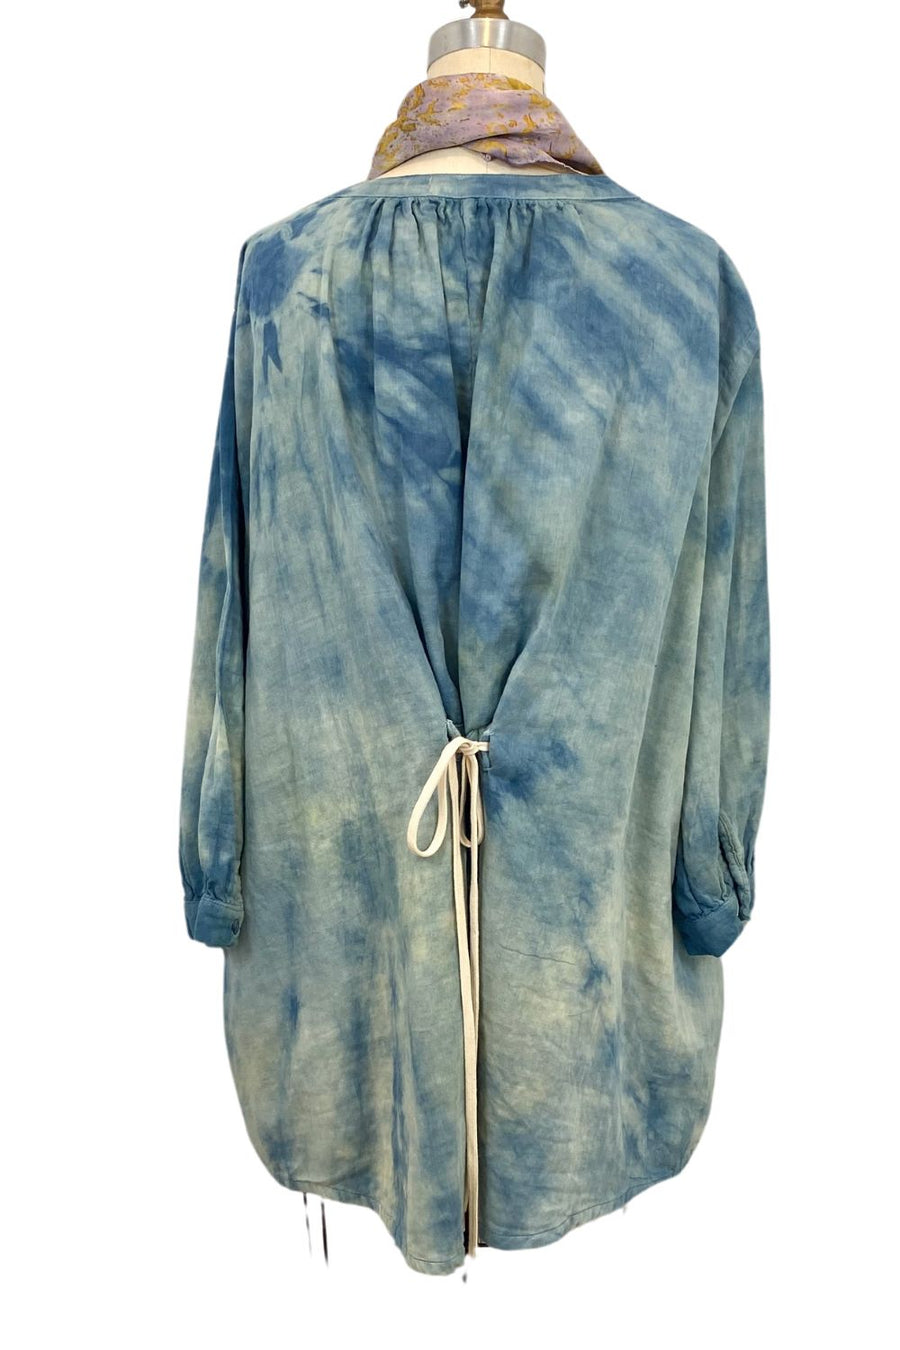 Botanically Dyed Cotton Tunic in Teal Ripple